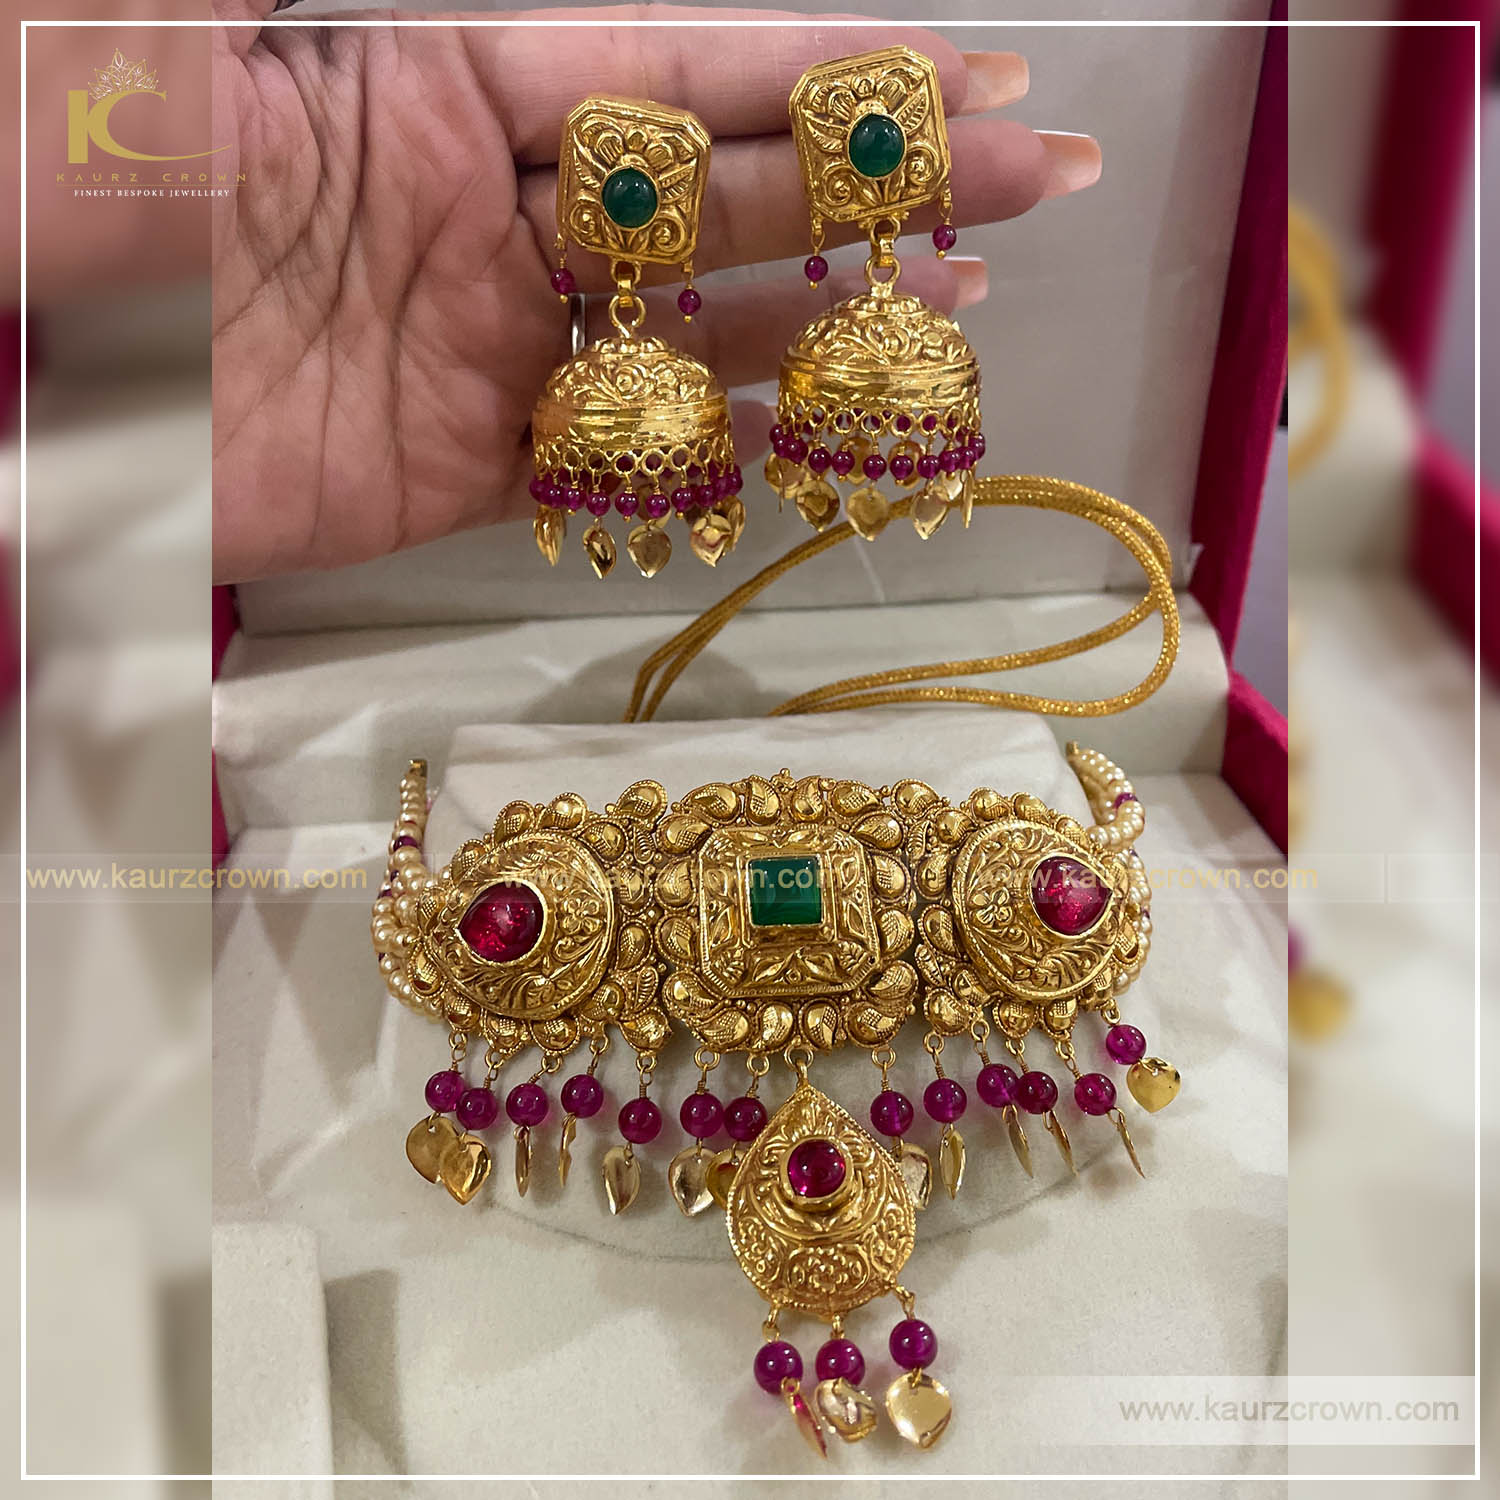 Maham Traditional Antique Gold Plated Choker Set , kaurz crown , maham choker set , kaurz crown jewellery , traditional gold plated , online jewellery store